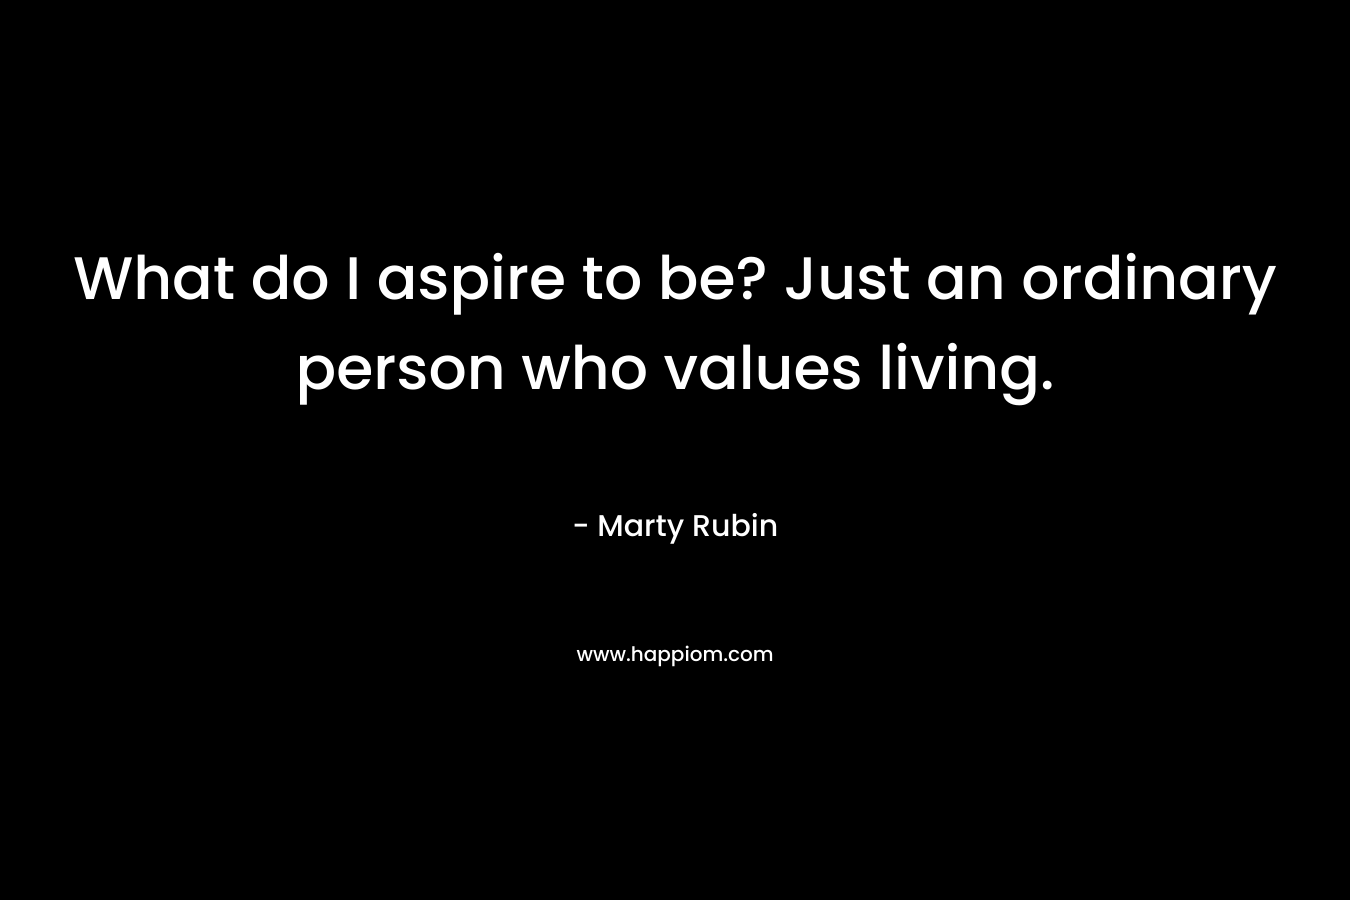 What do I aspire to be? Just an ordinary person who values living.